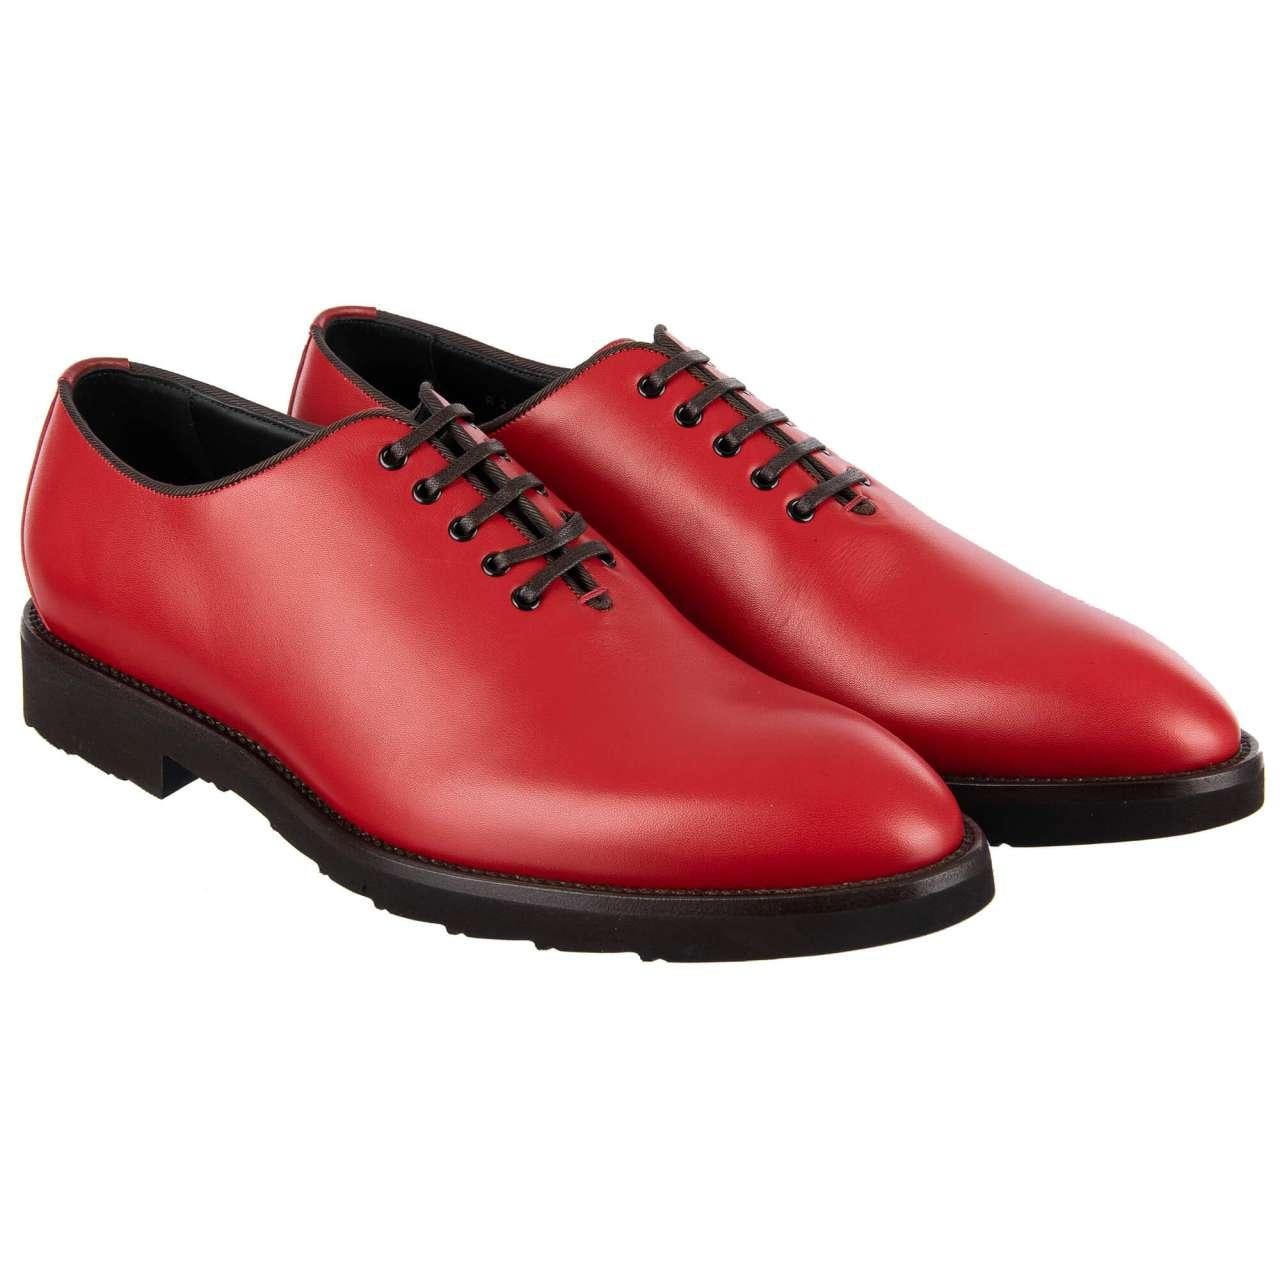 Dolce & Gabbana - Leather Oxford Shoes SICILIA Red EUR 43 For Sale 1